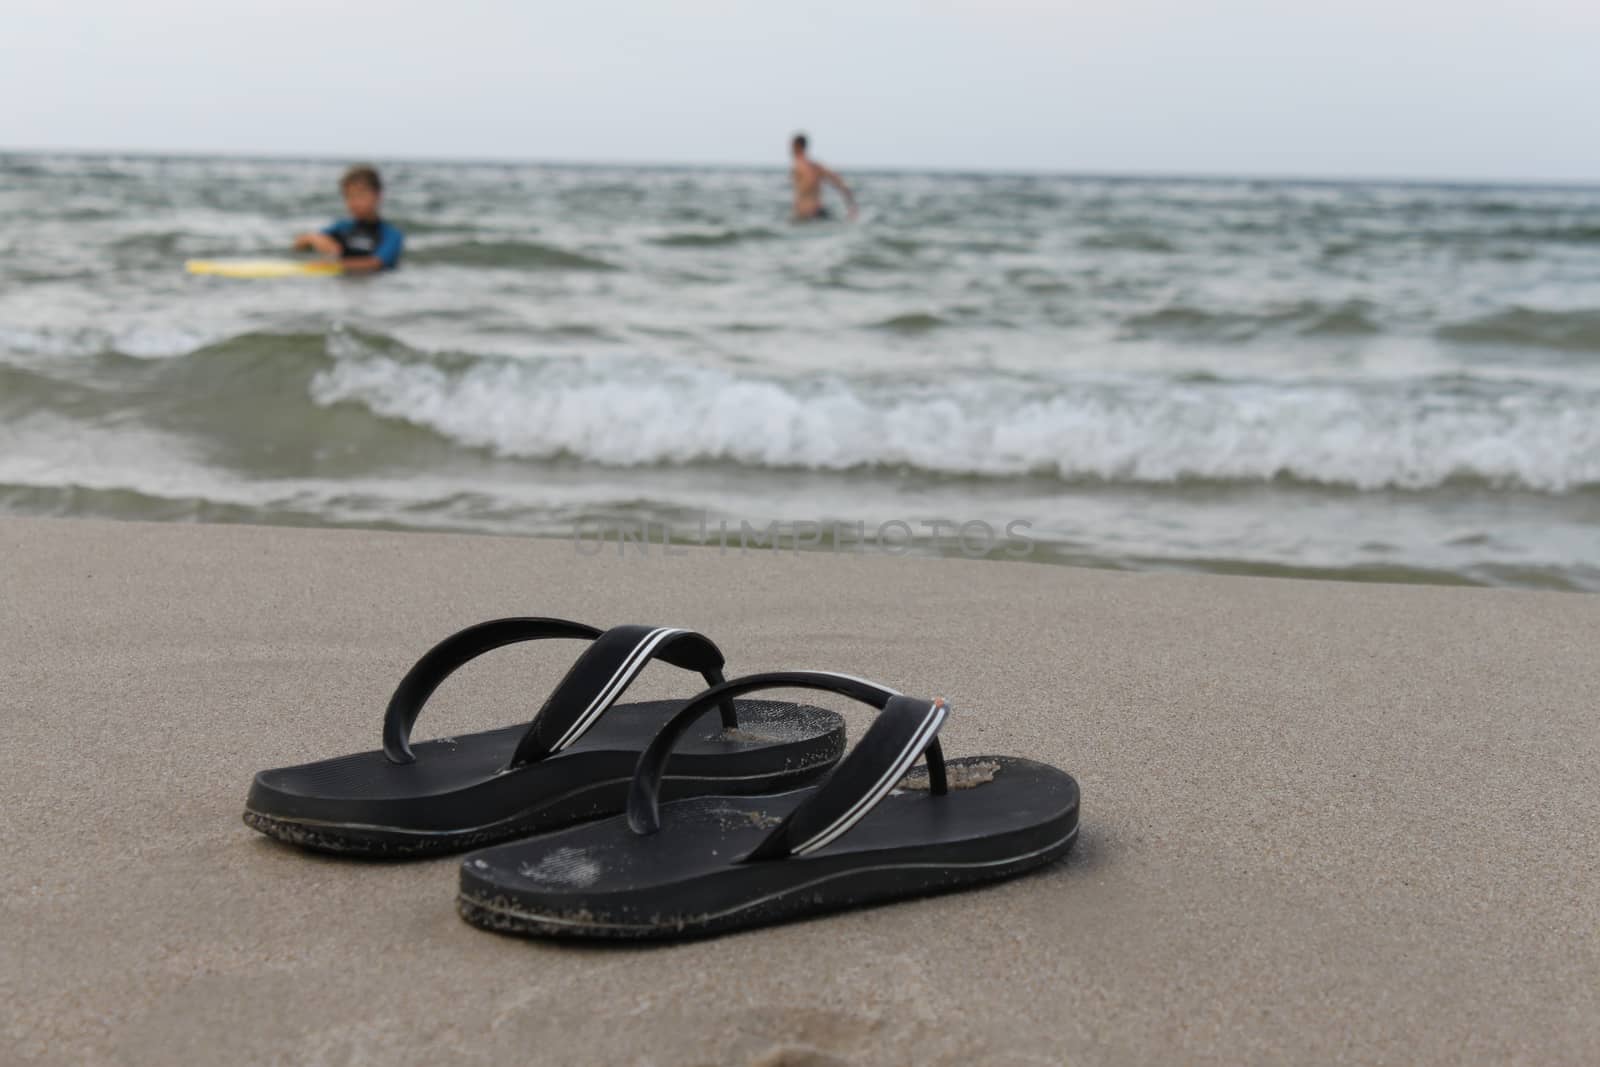 Slippers on the background of the sea and the beach by Kasia_Lawrynowicz